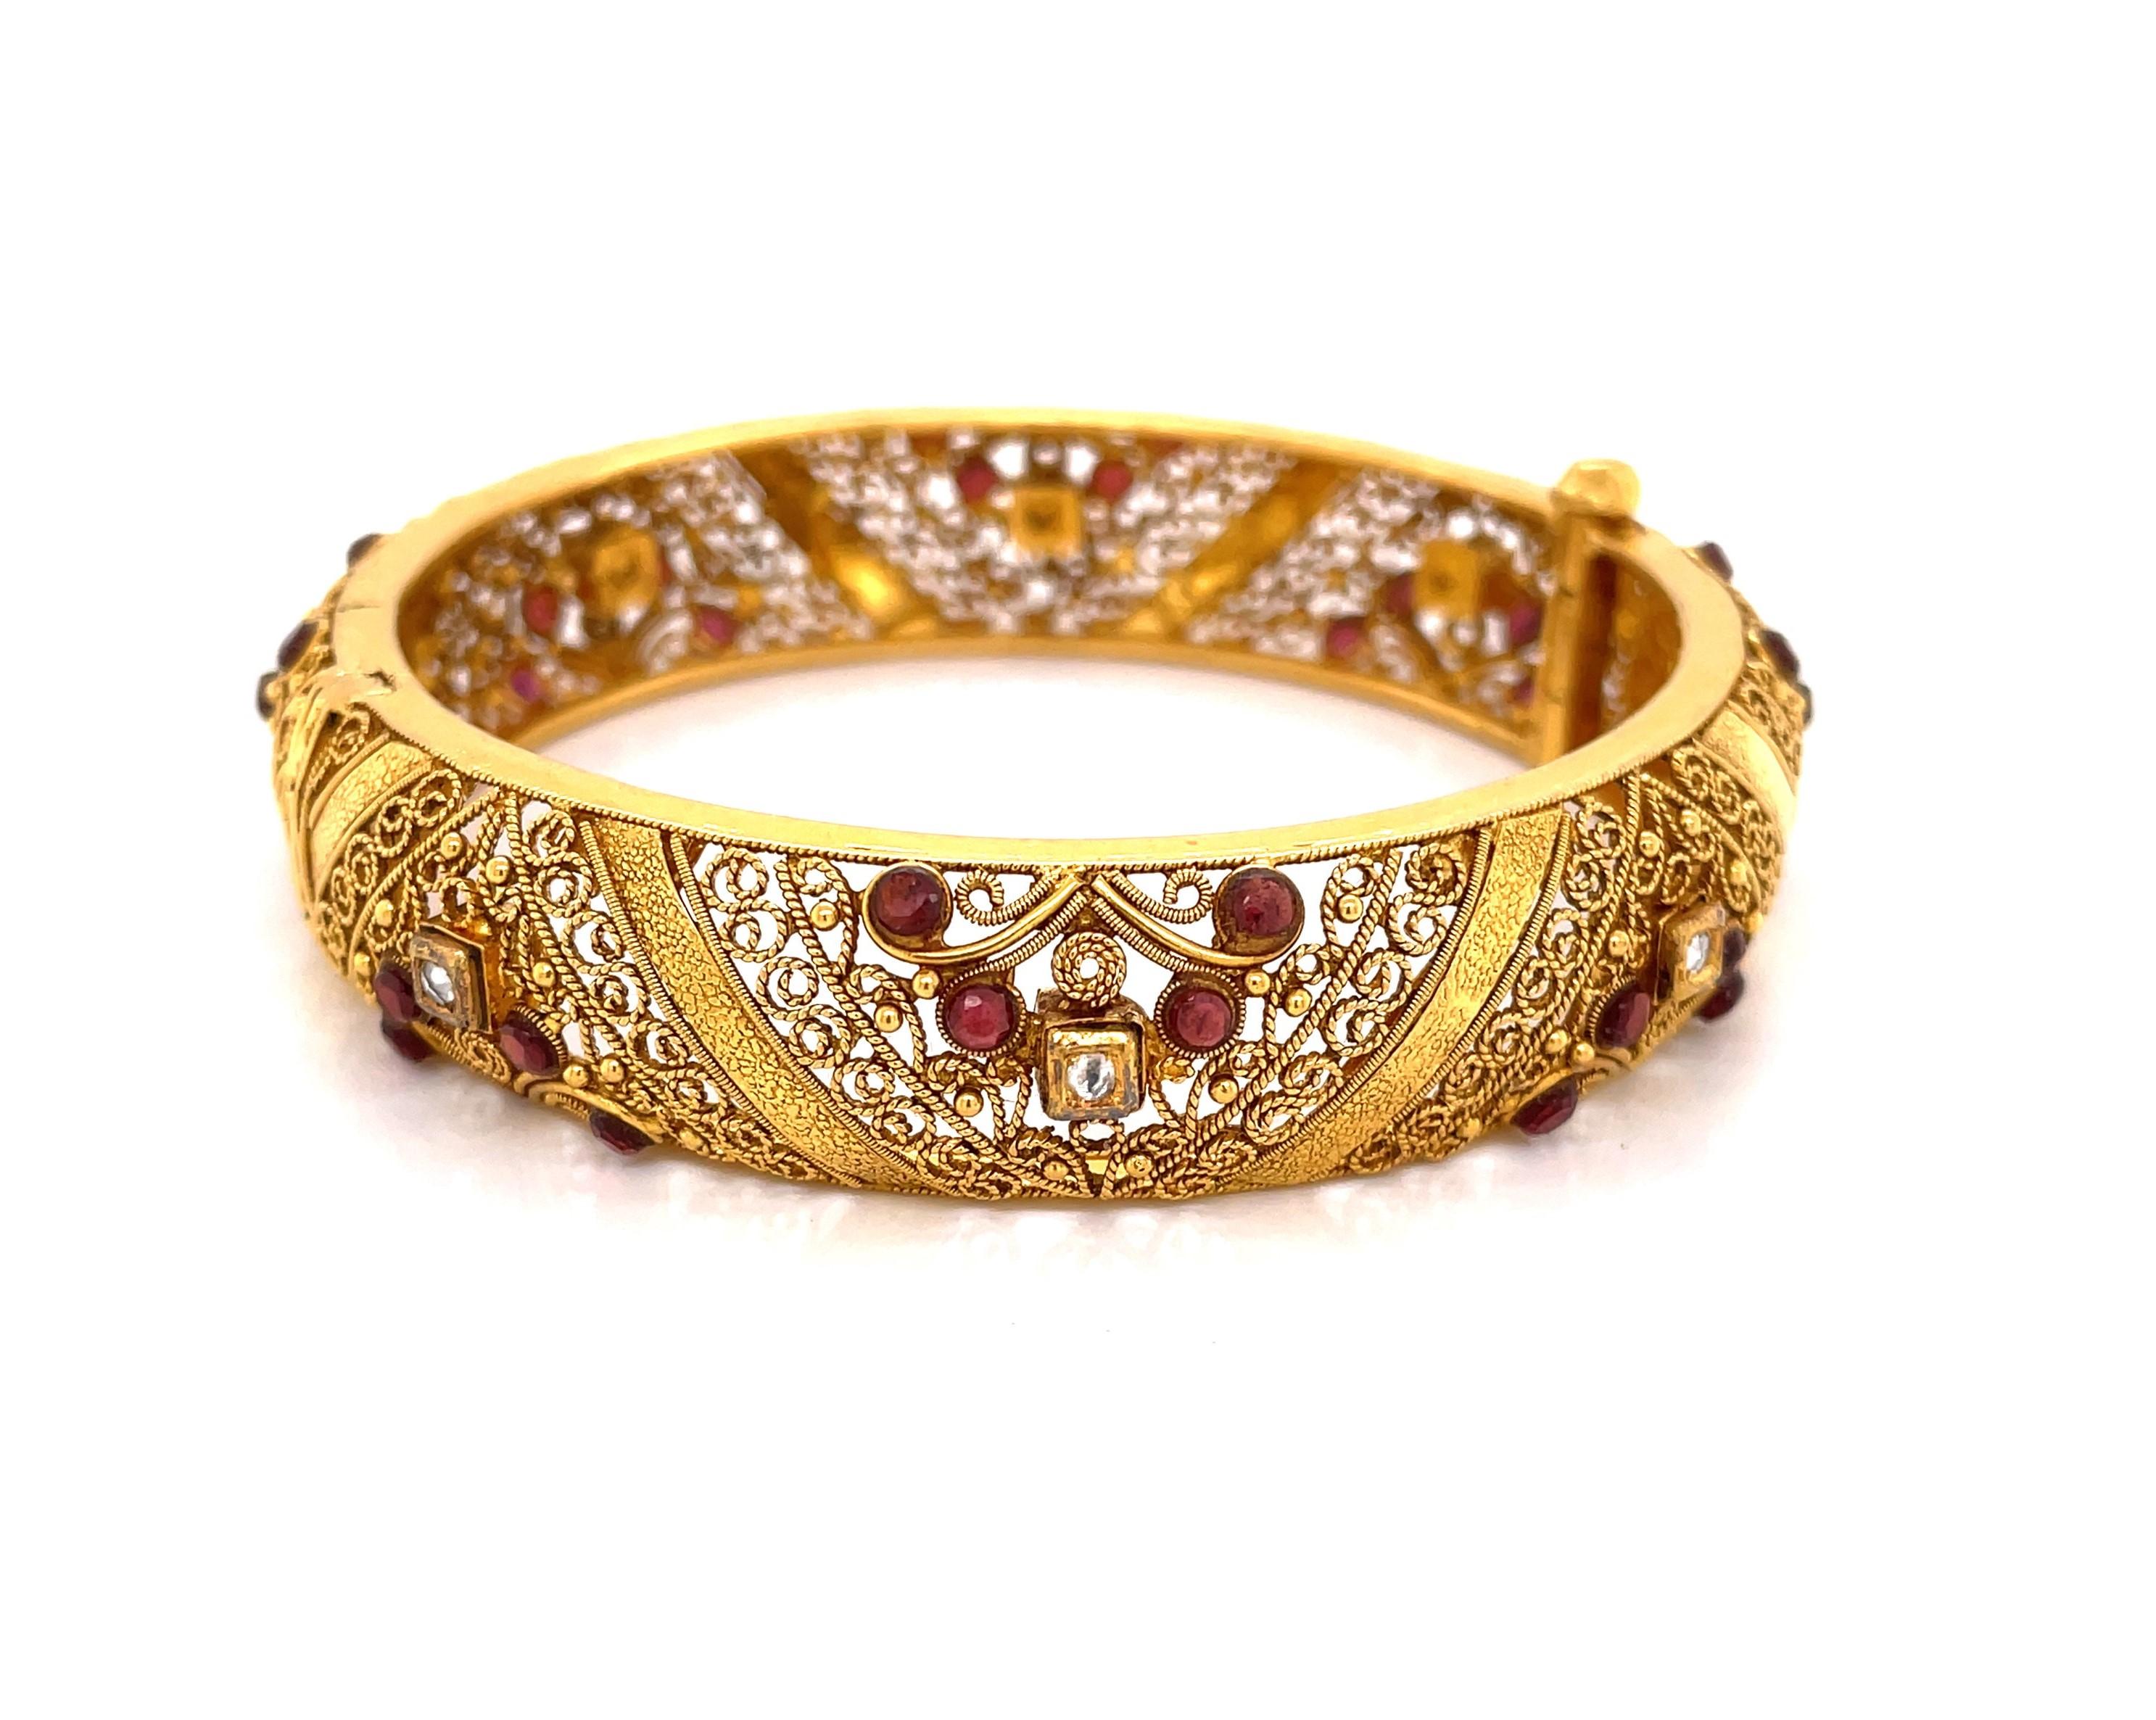 Surrender to the spell of this jeweled work of art crafted to adorn an Indian bride on her wedding day.  In 22 Karat yellow gold this stunning filigree piece with decorative gold ribbon detail is approximately 5/8 inches wide and is attractively